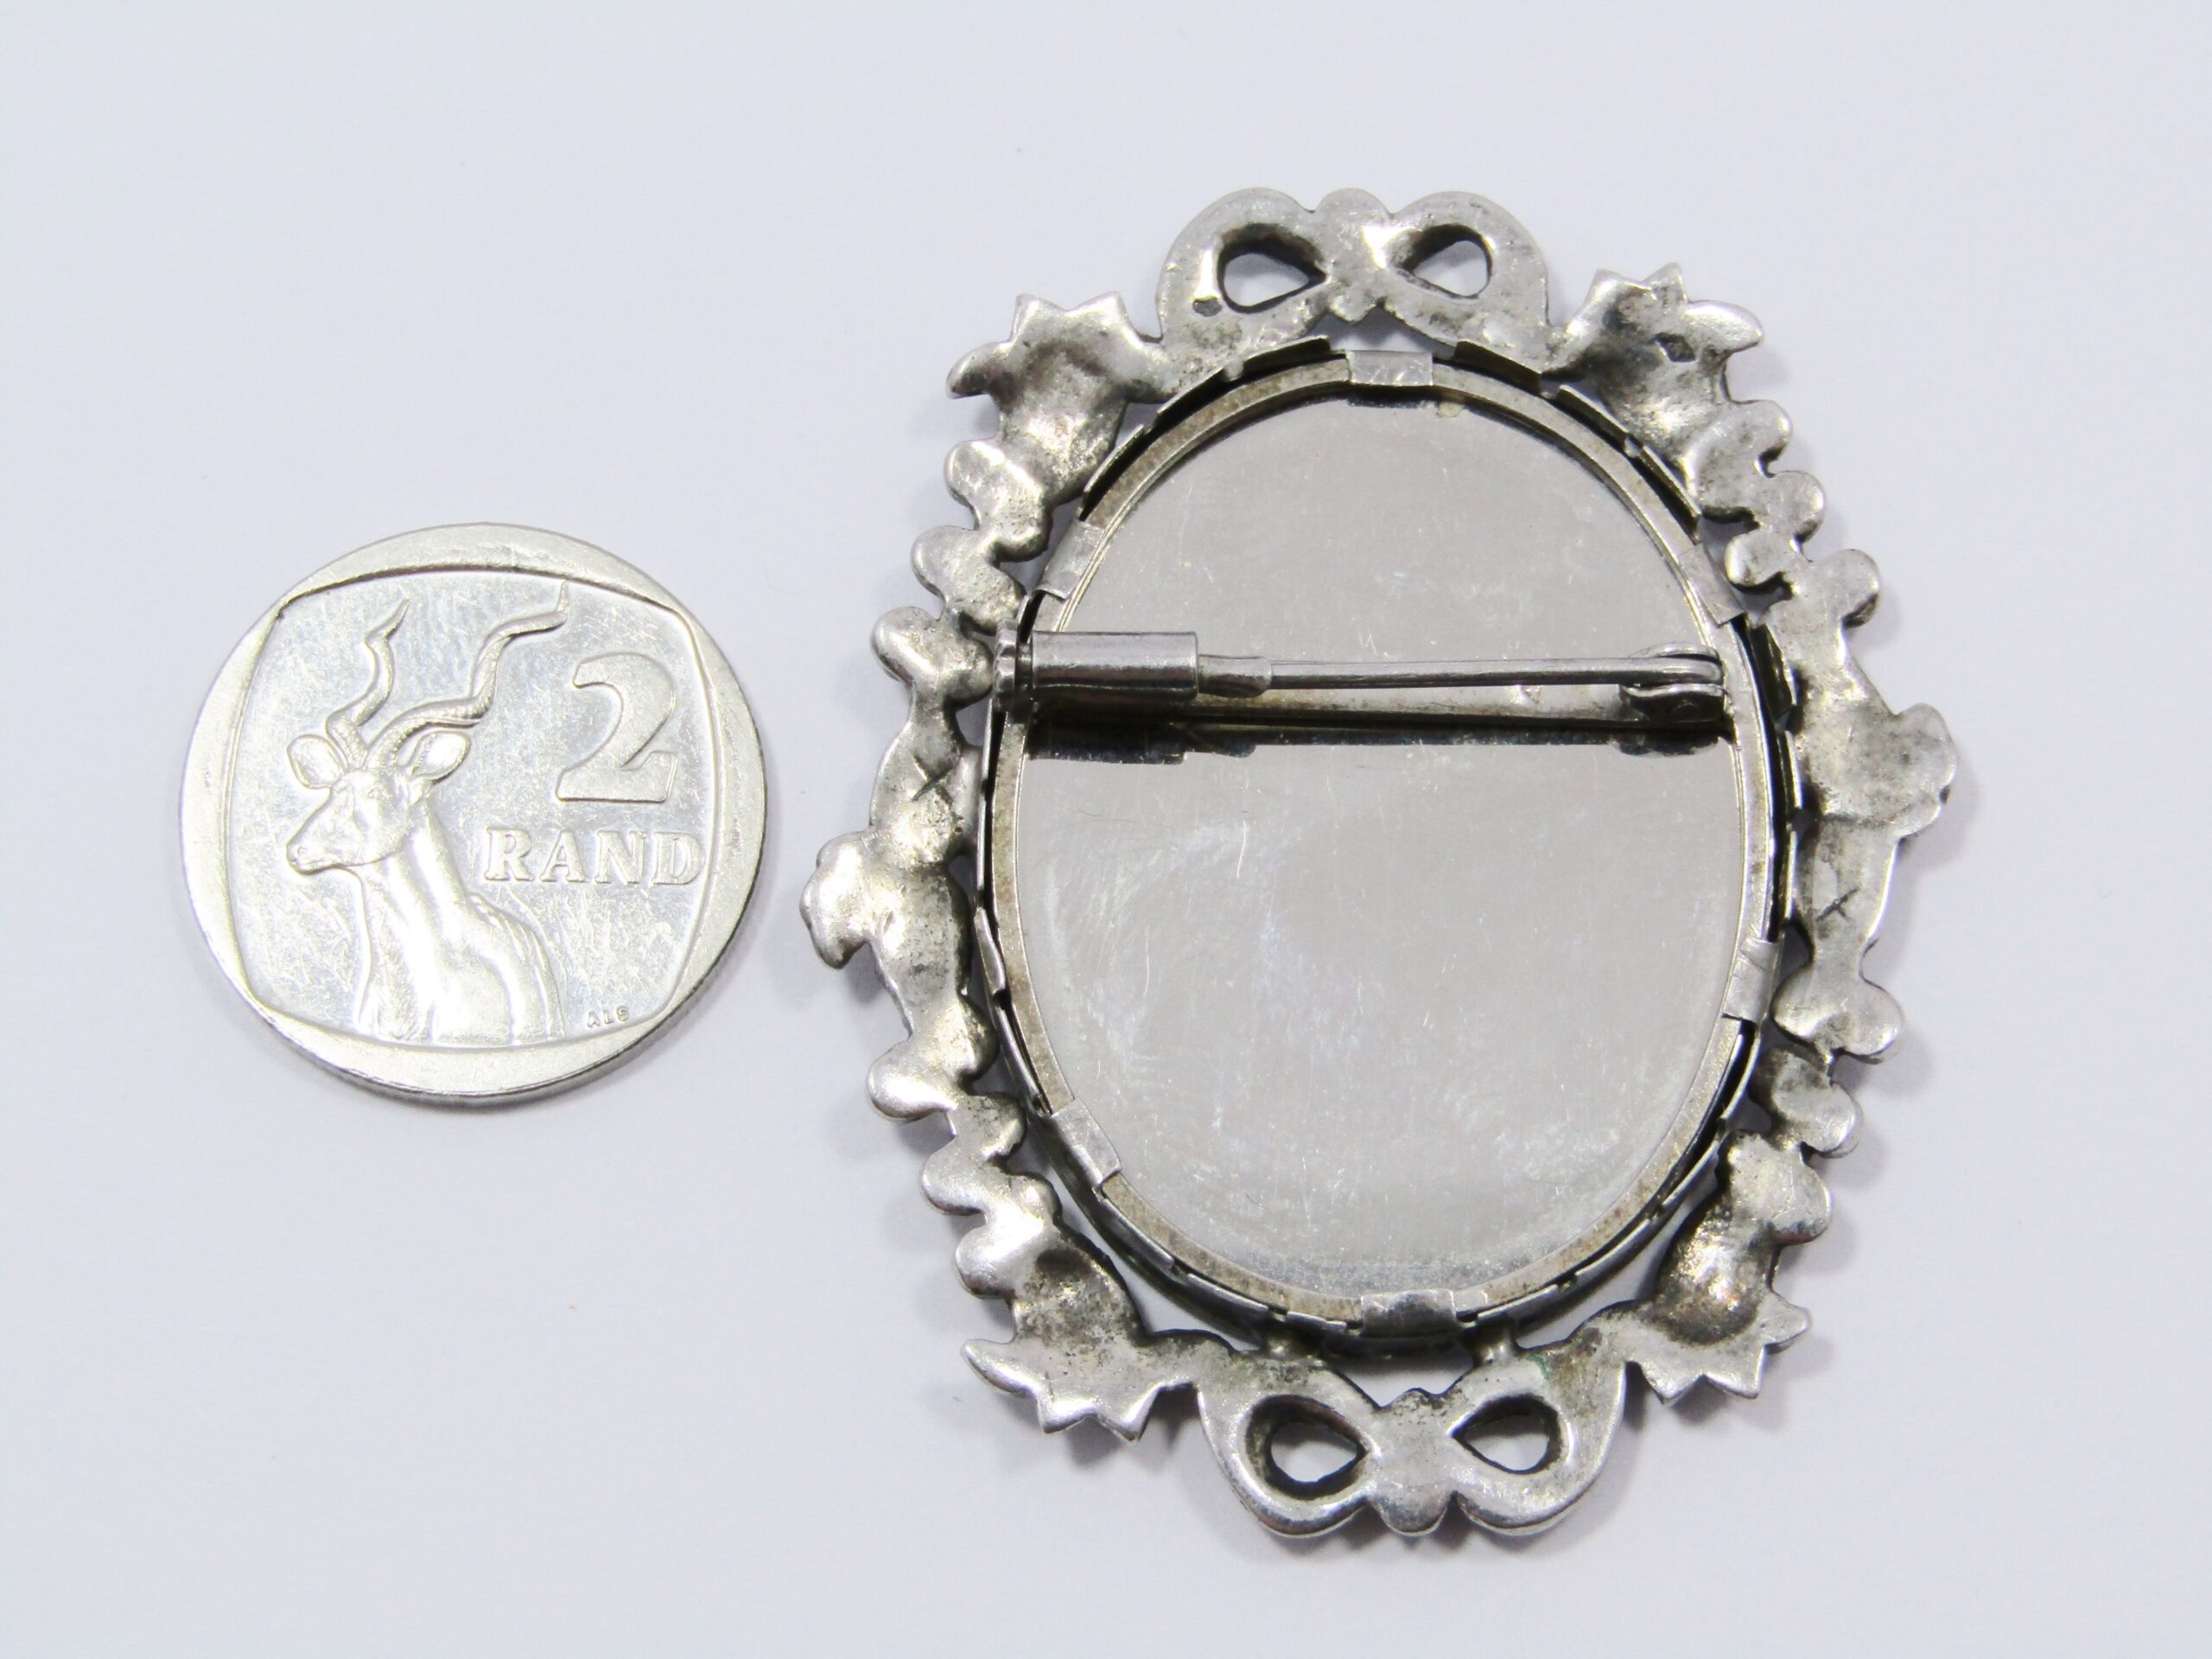 A Gorgeous Hand Painted Vintage Design Self Portrait Brooch In Silver